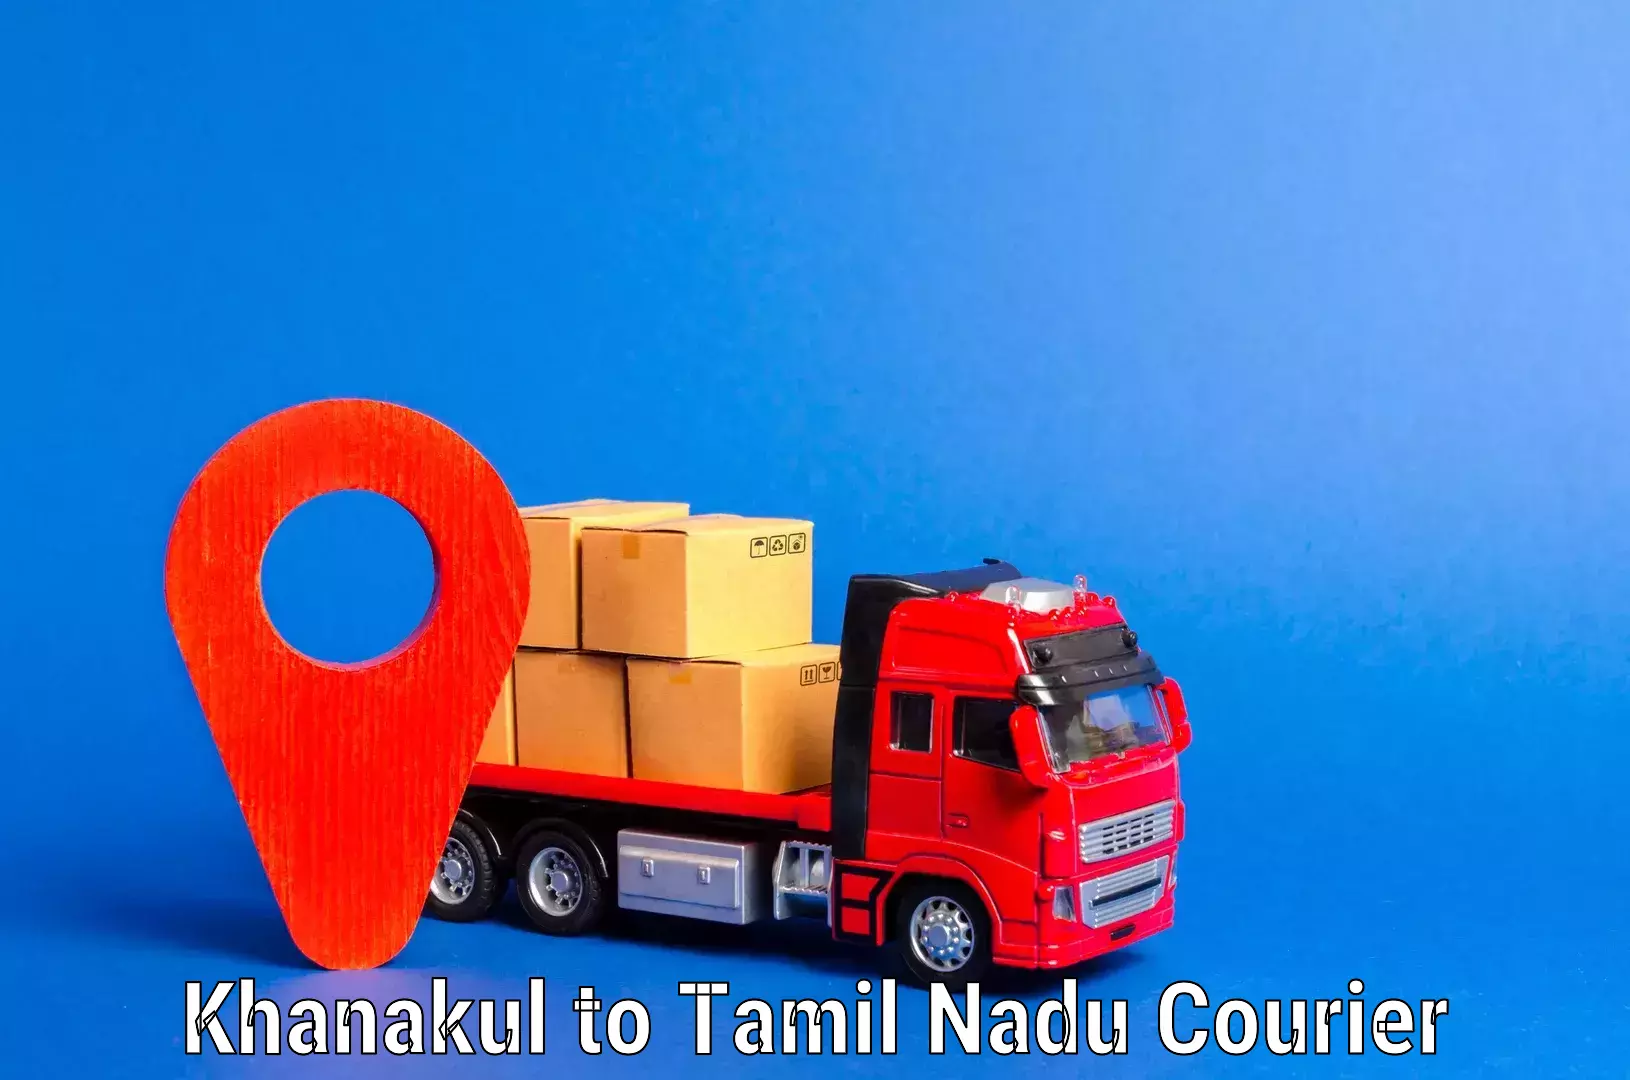 Professional movers and packers Khanakul to Tamil Nadu